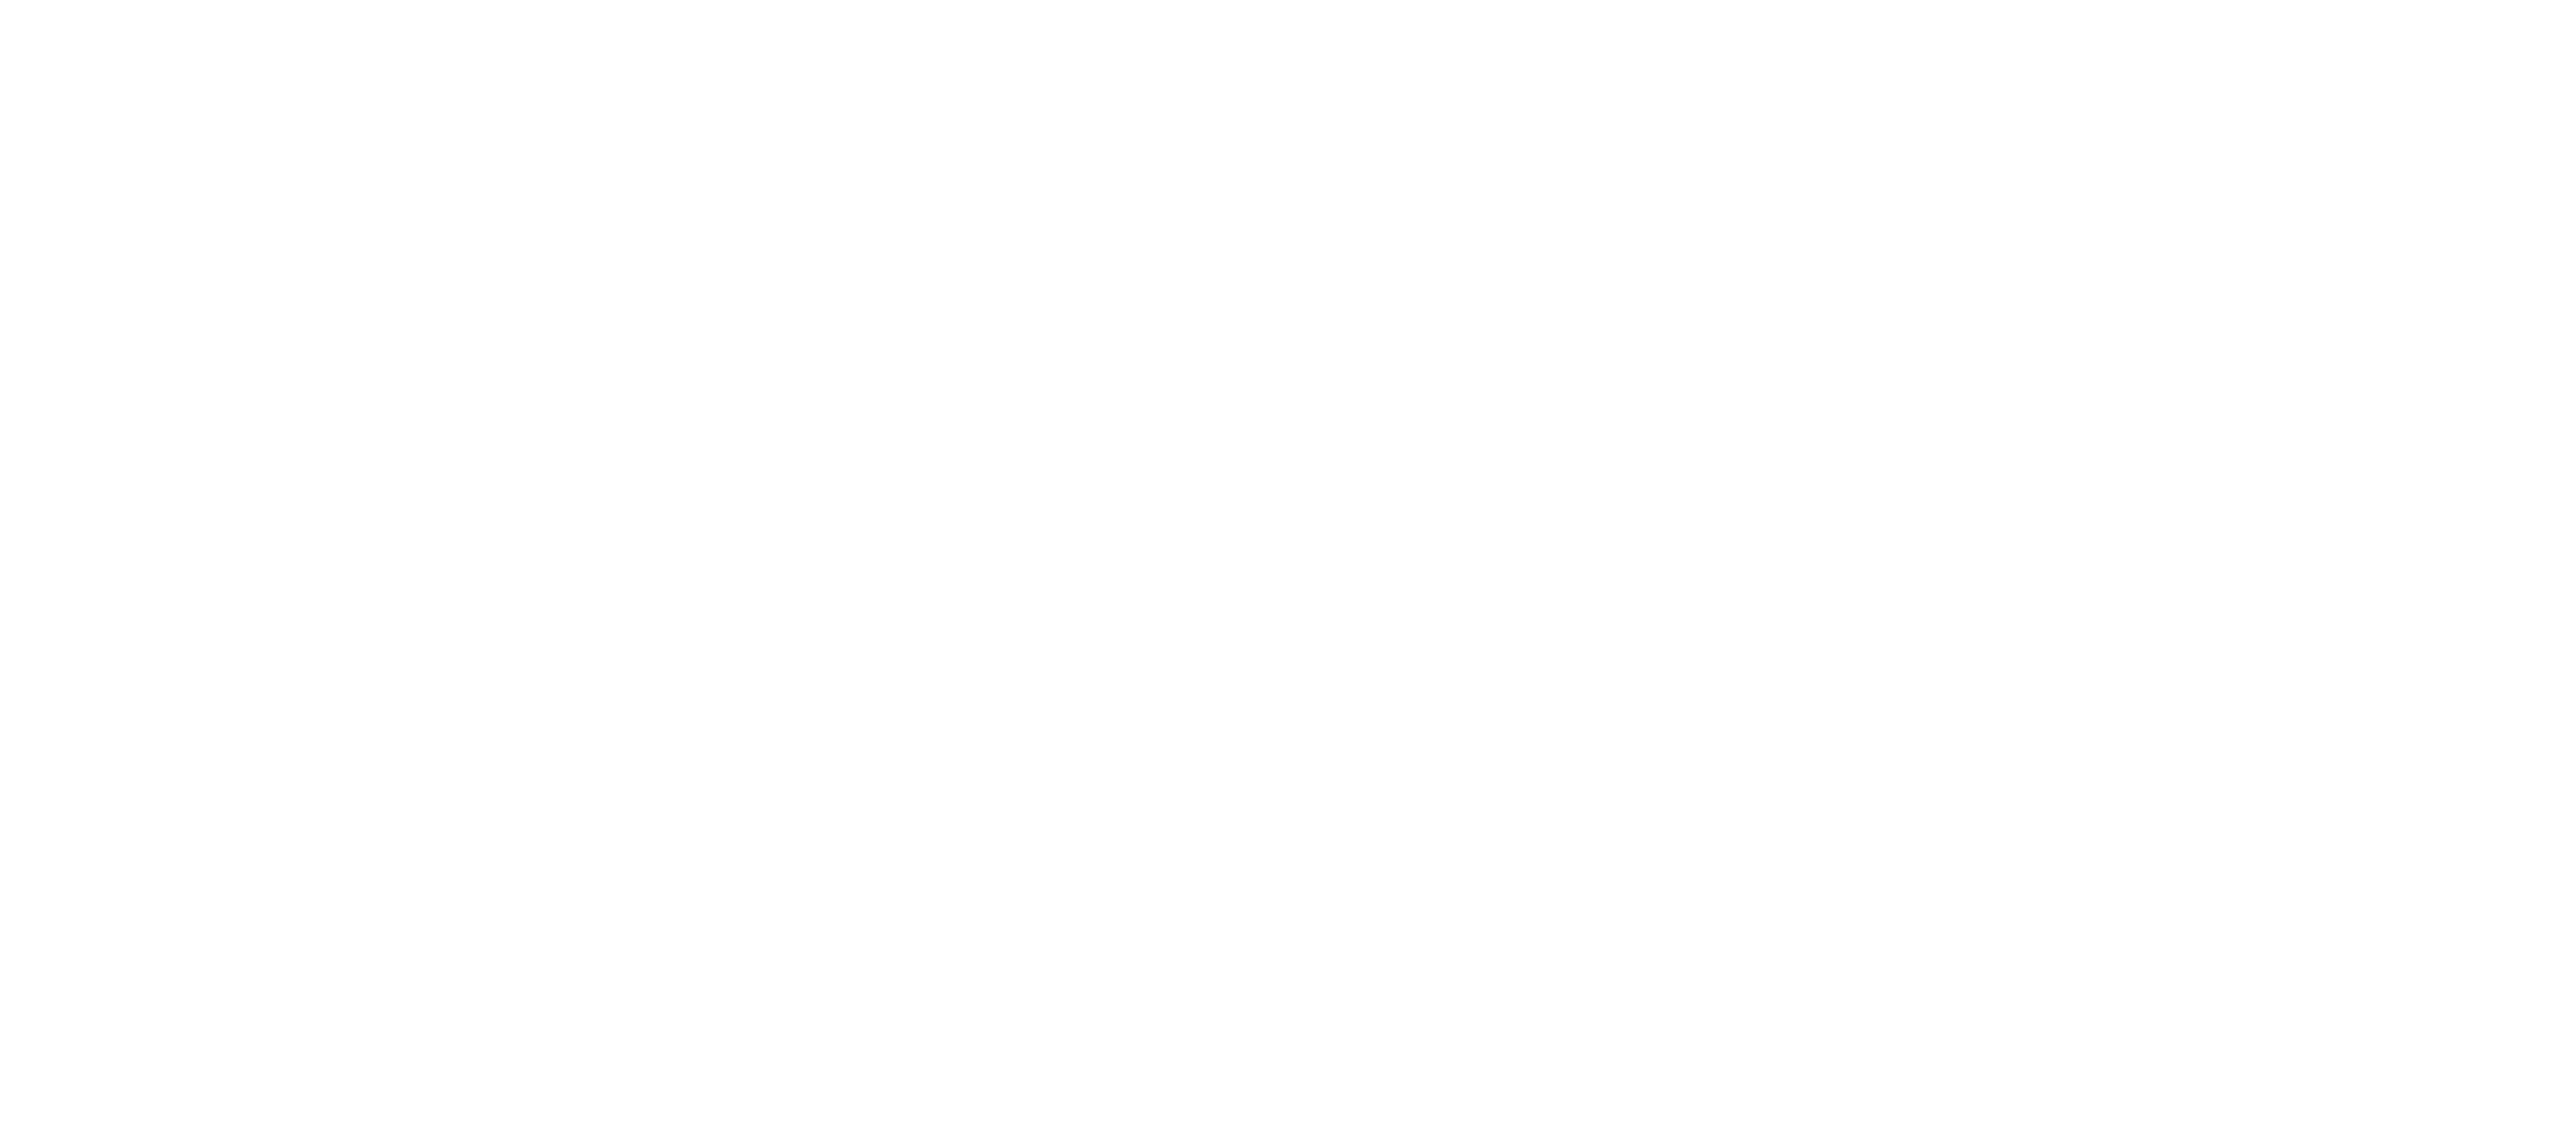 Outline of USA and states